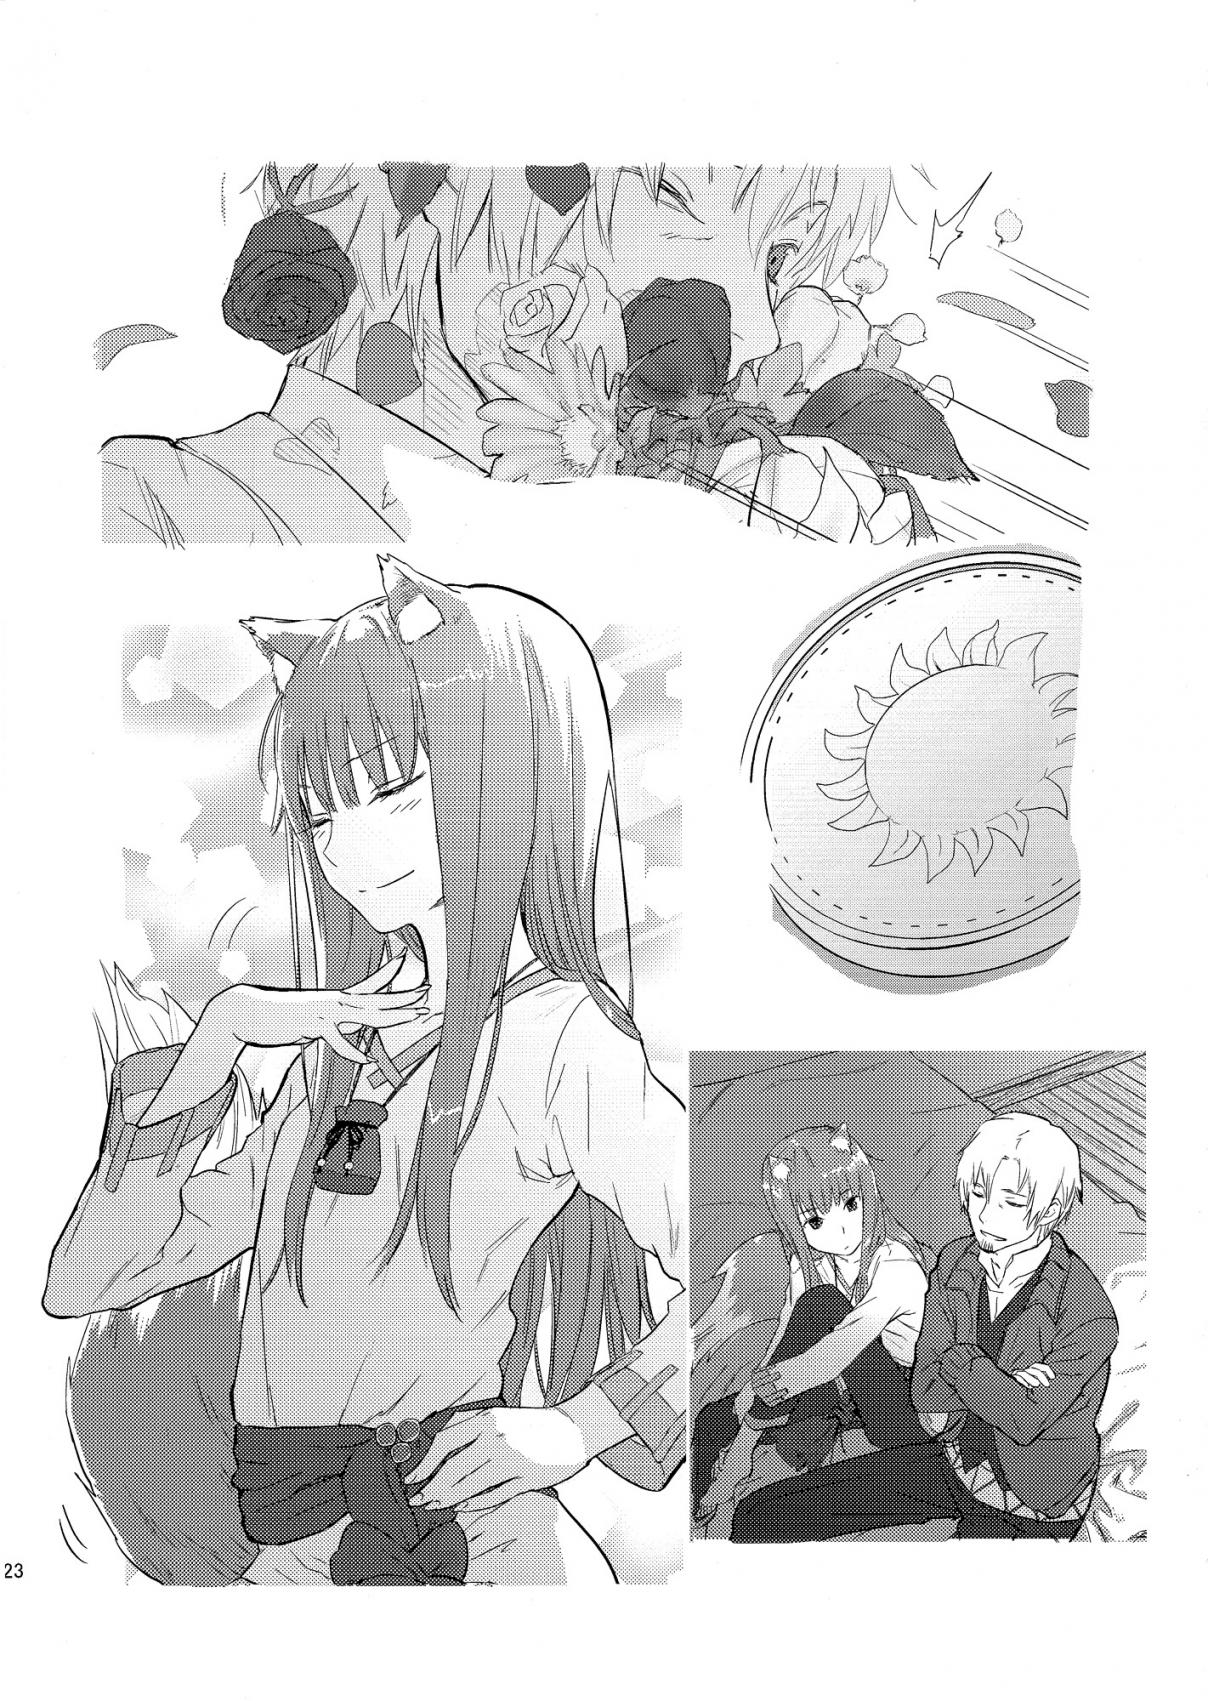 Spice and Wolf Harvest (Doujinshi) Oneshot